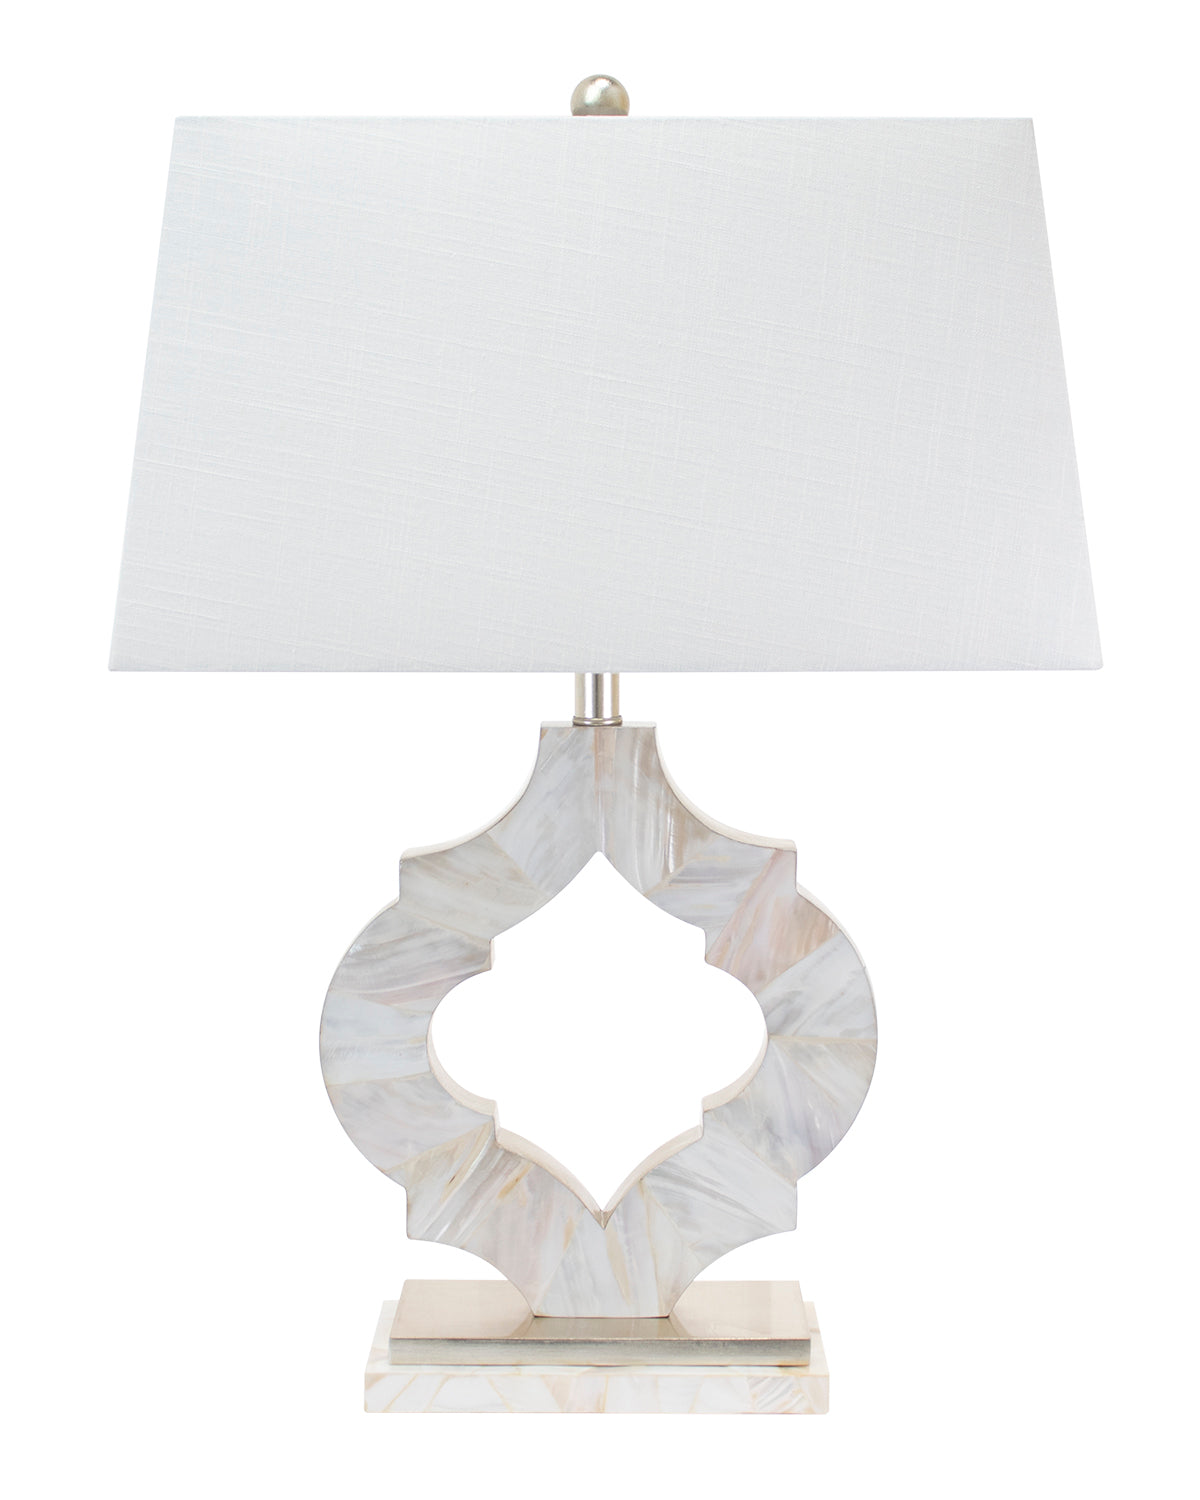 Sarasota Mother of Pearl Table Lamp - NEW - Couture Lamps